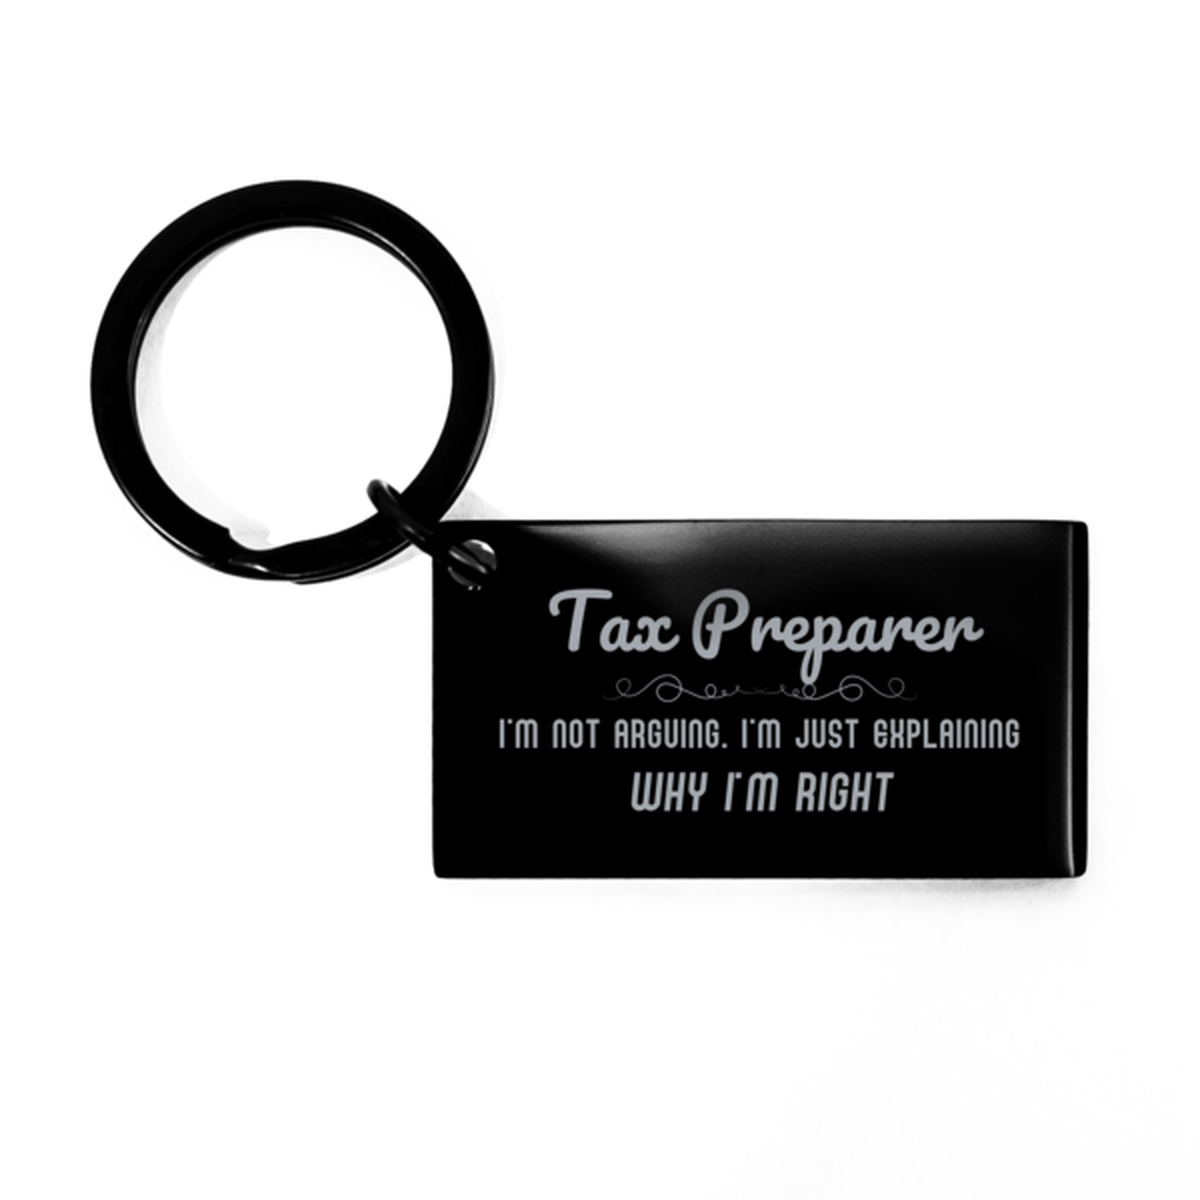 Tax Preparer I'm not Arguing. I'm Just Explaining Why I'm RIGHT Keychain, Funny Saying Quote Tax Preparer Gifts For Tax Preparer Graduation Birthday Christmas Gifts for Men Women Coworker